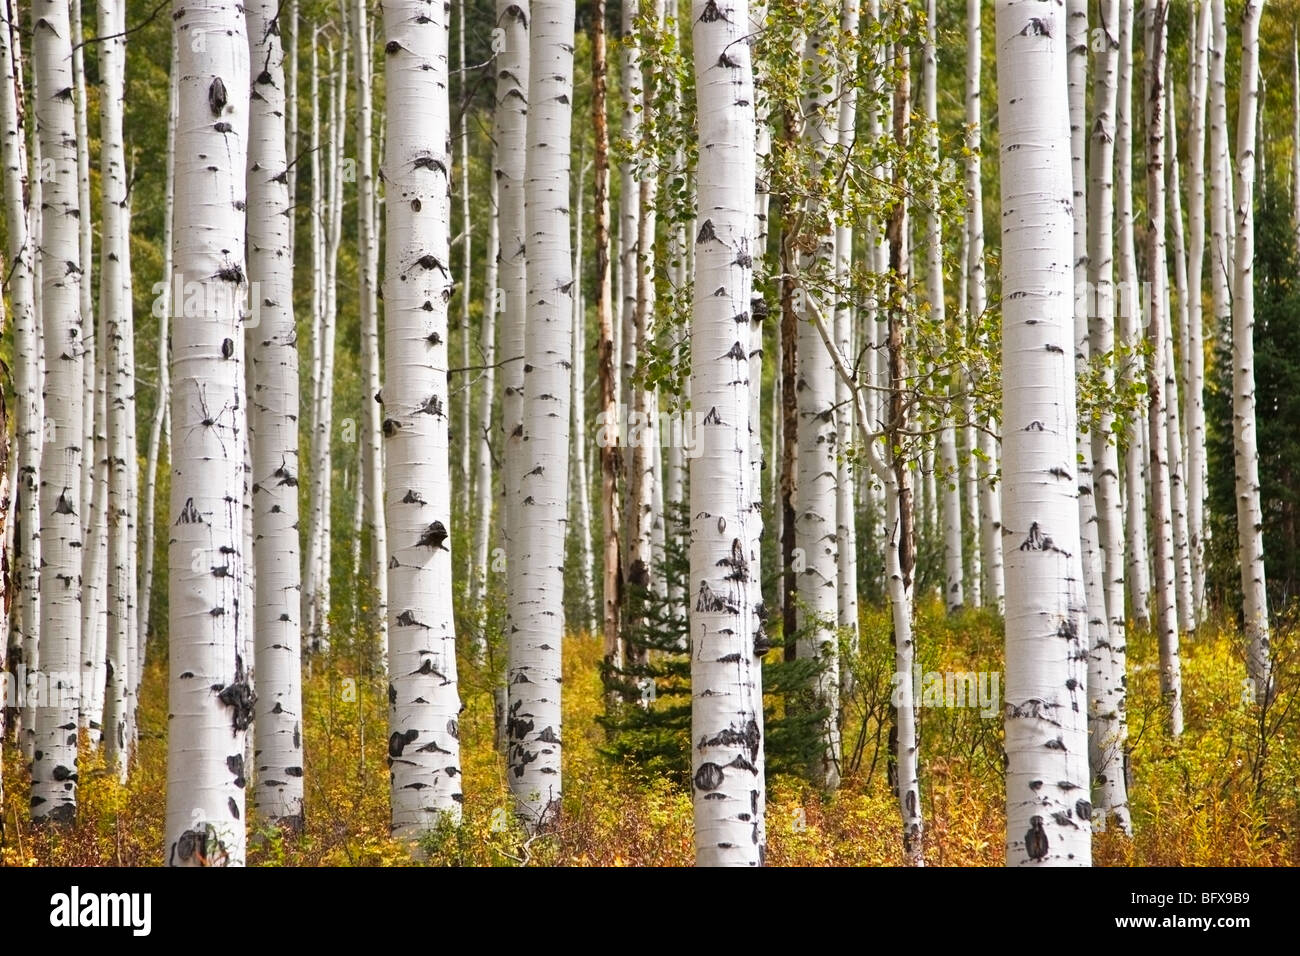 Details of multiple Silver Birch and Aspen barks with Fern on the ground Stock Photo